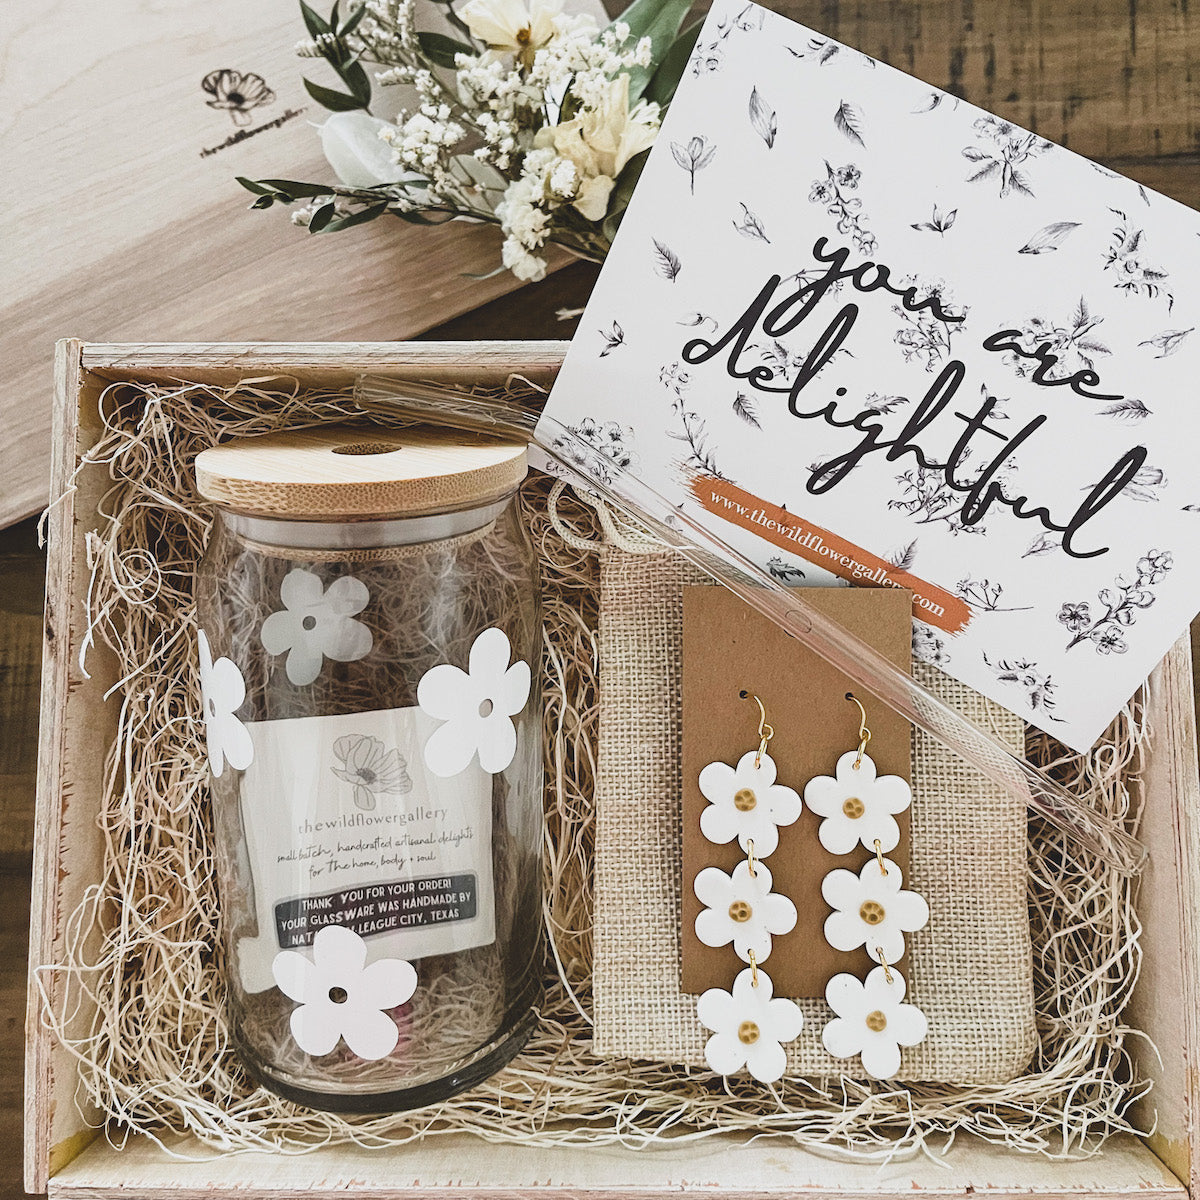 handcrafted wooden gift box with daisy glass jars and white daisy clay earrings